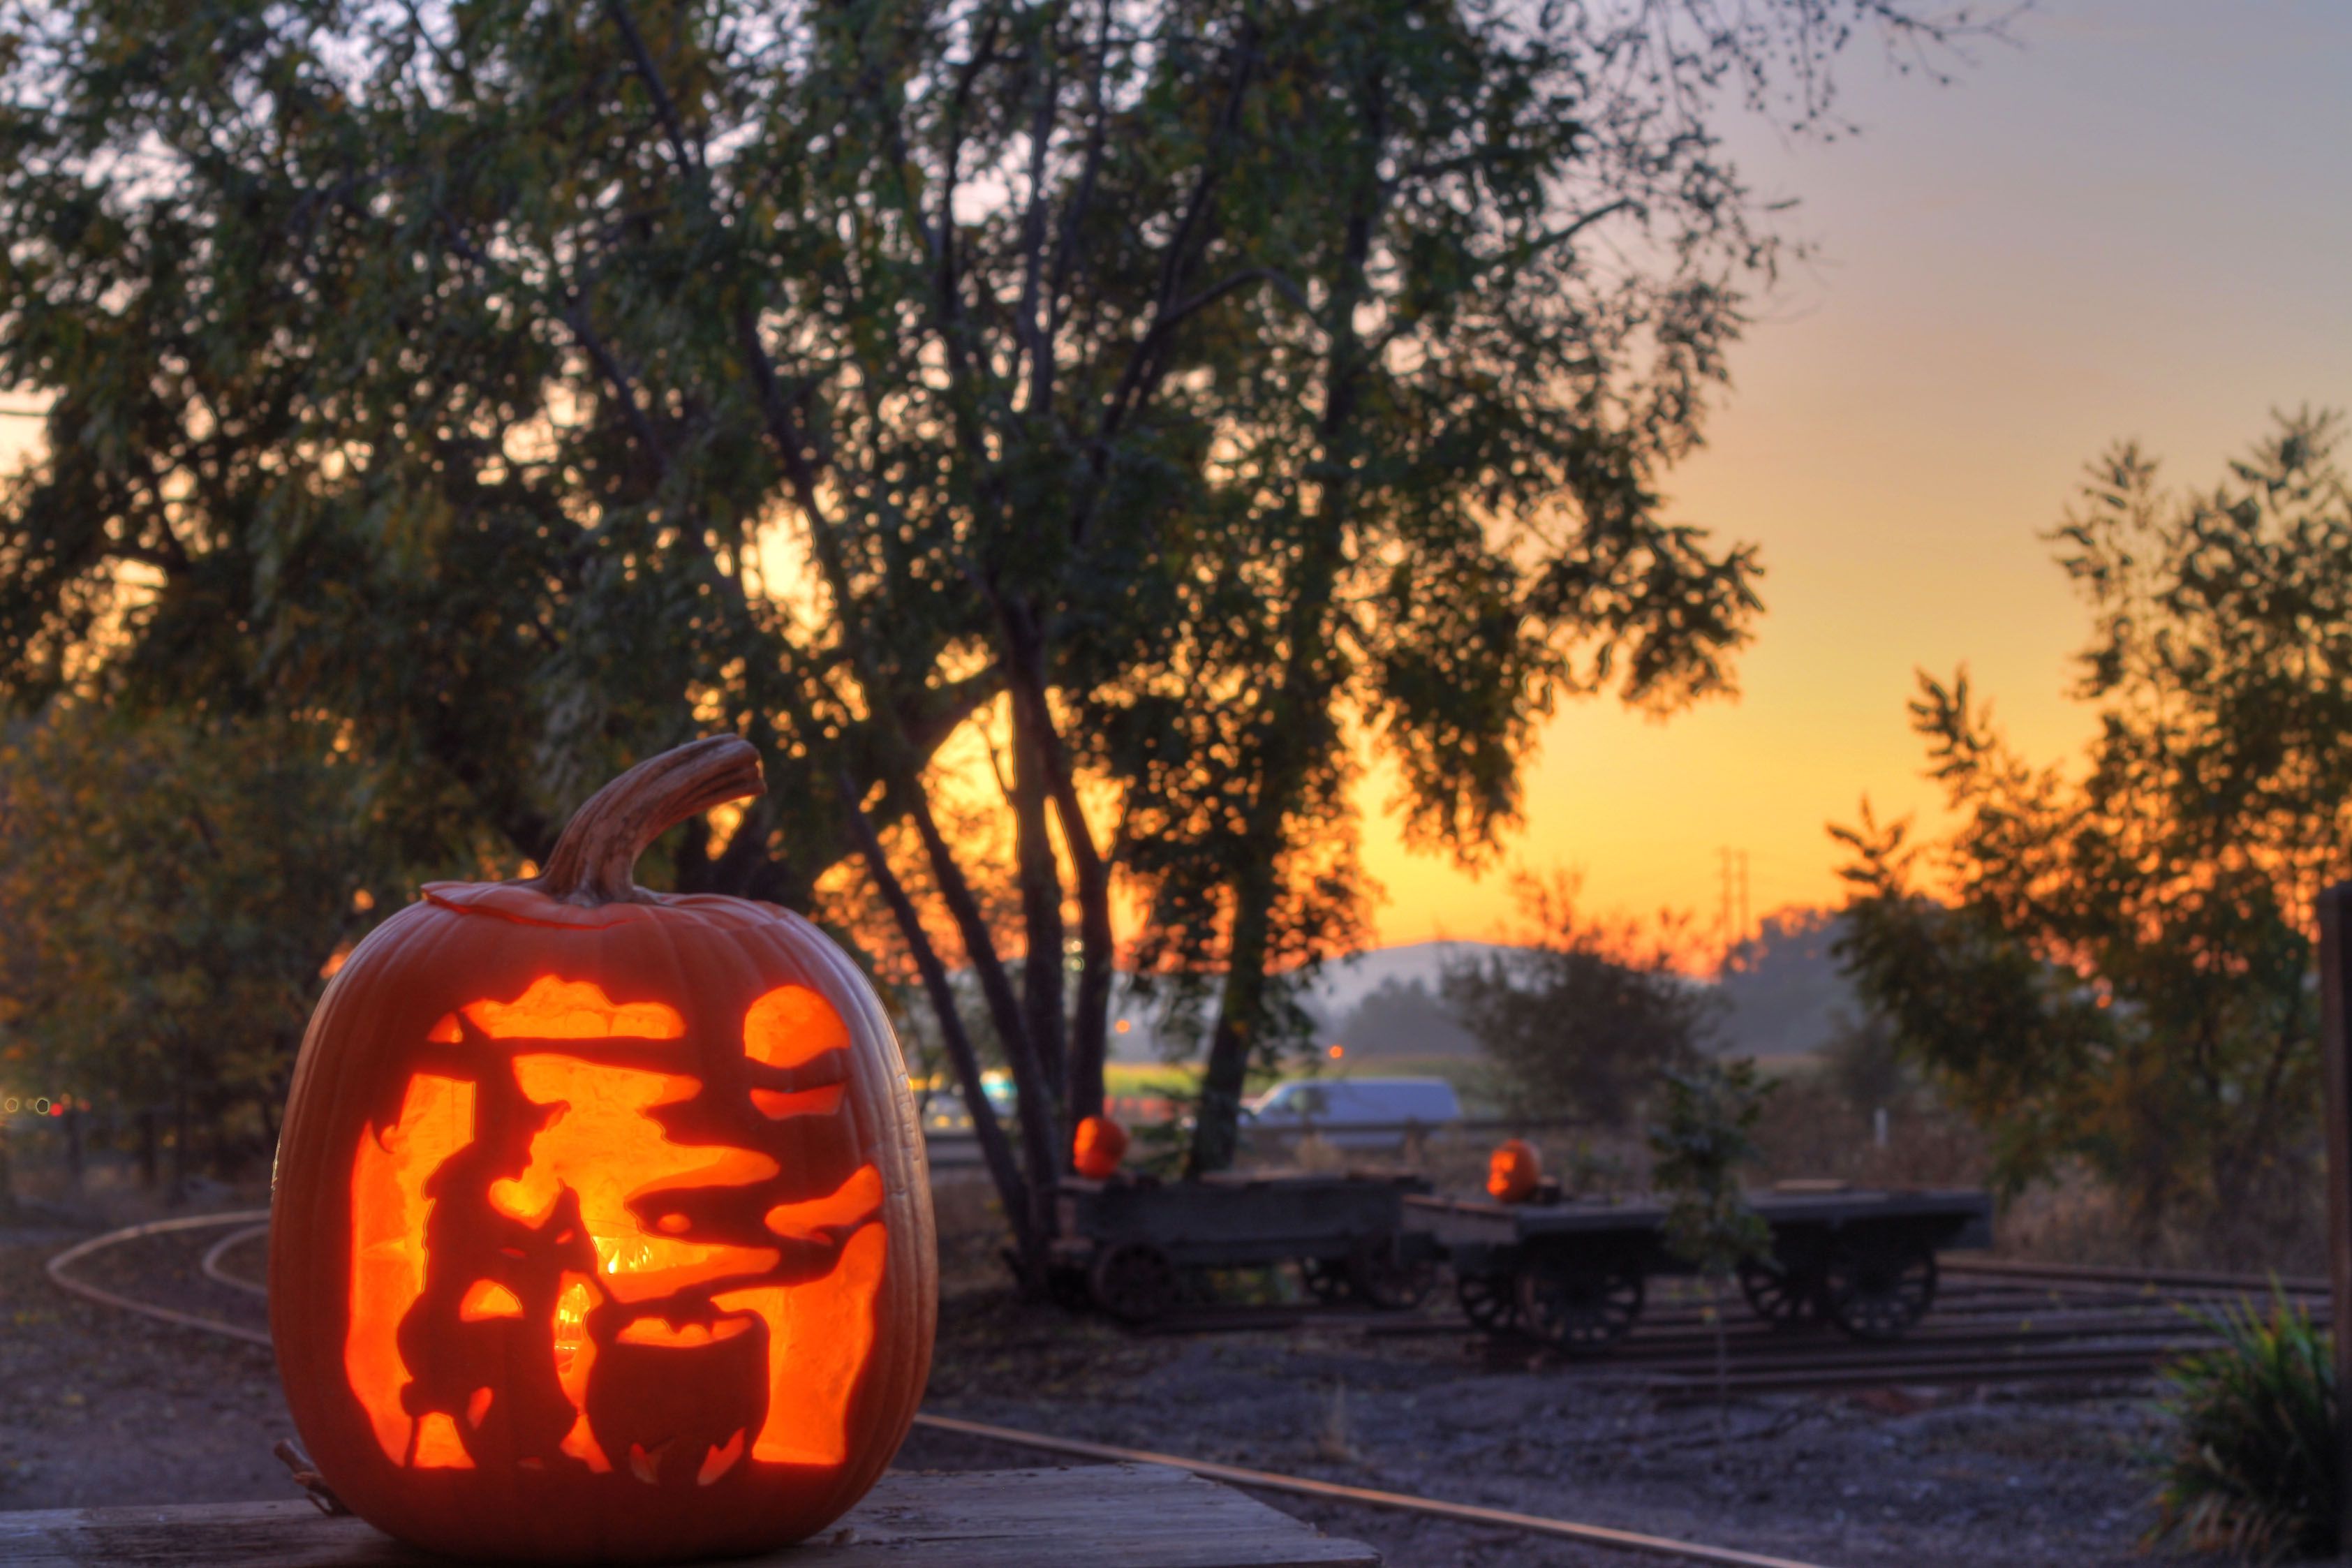 What's the trick to the Instagram-friendly jack-o'-lanterns in